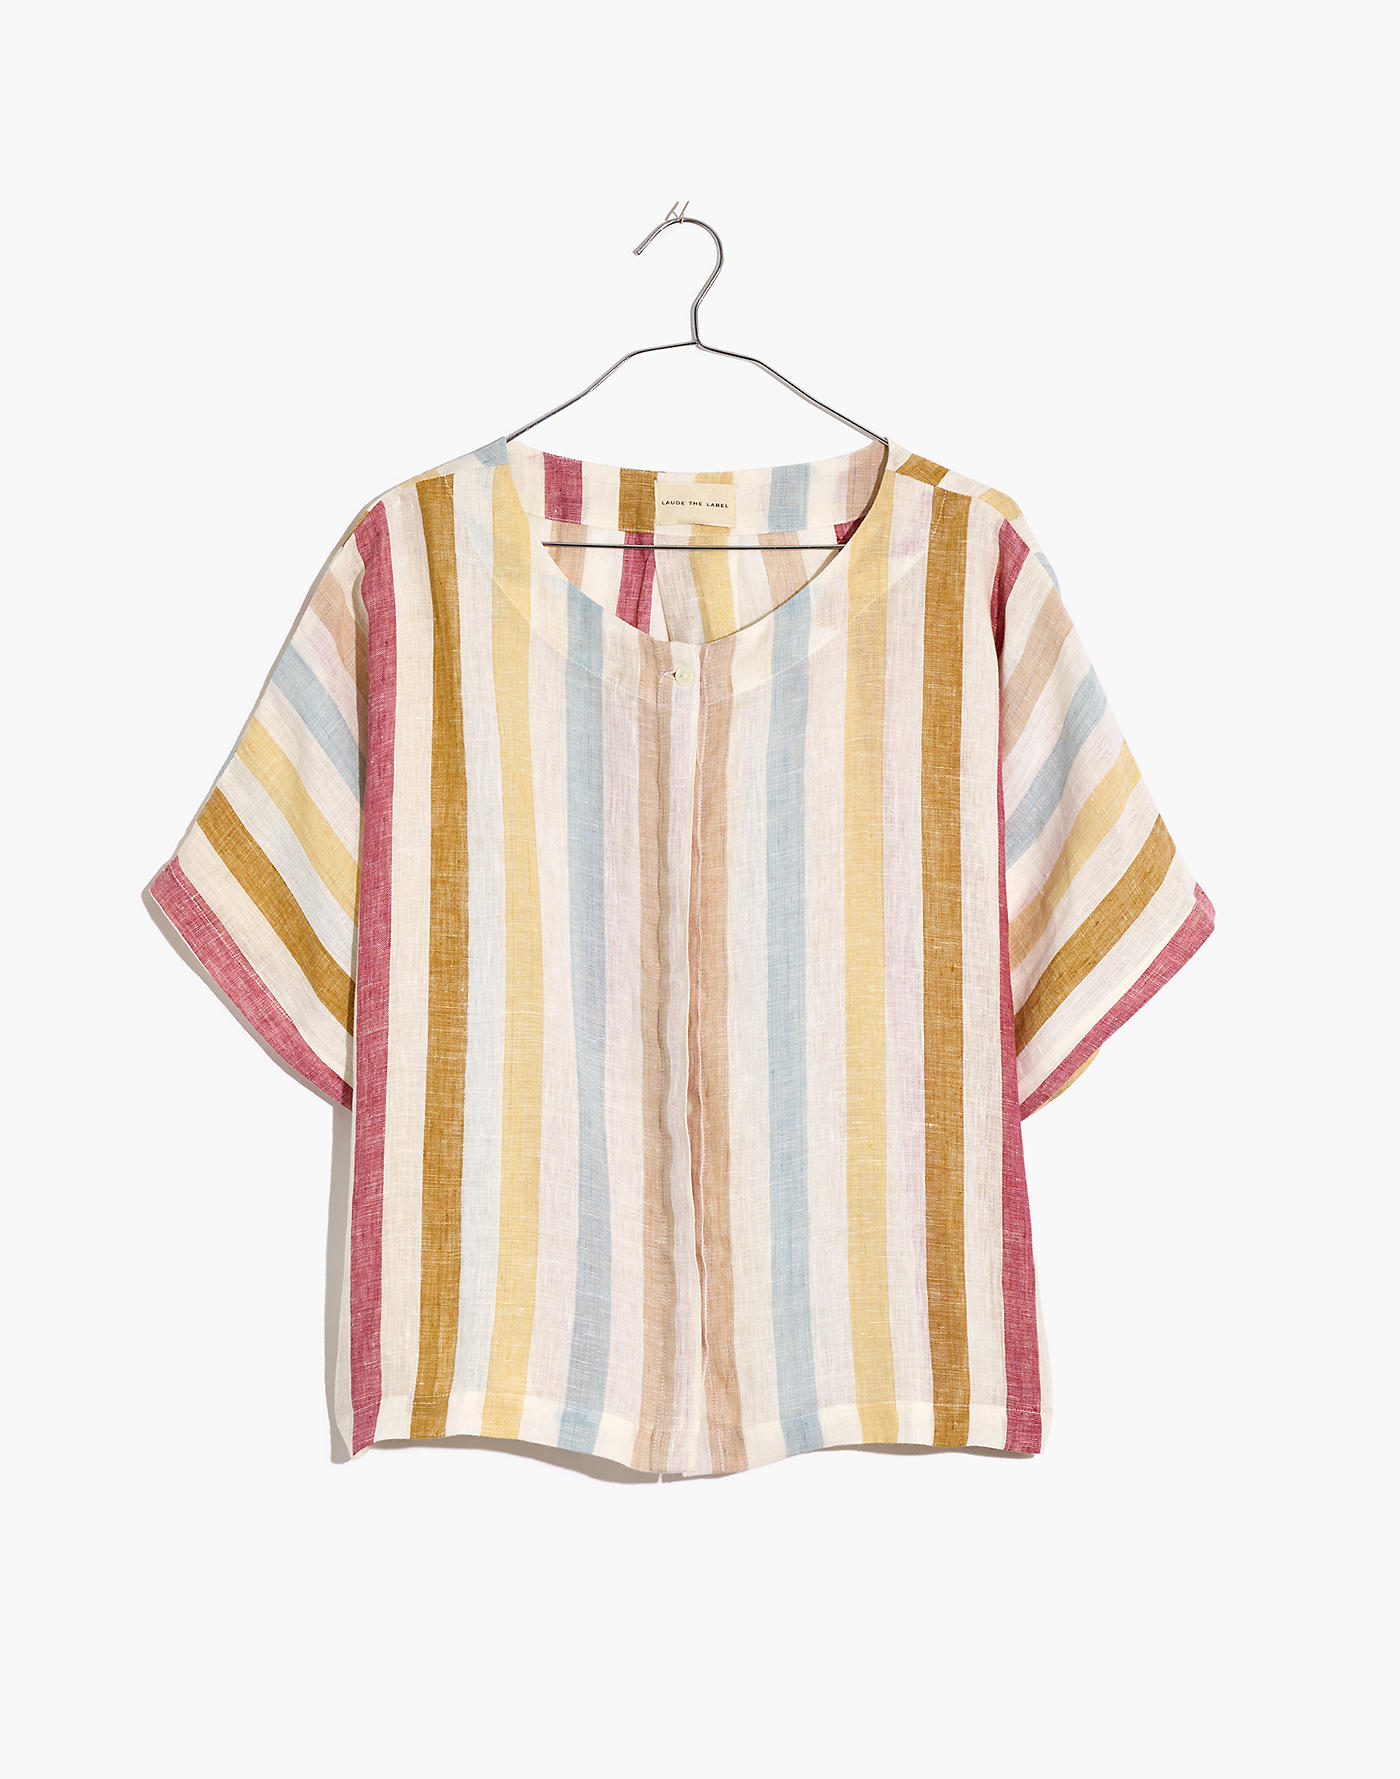 Madewell x LAUDE the Label Bo Button-Down Shirt in Painter Stripe